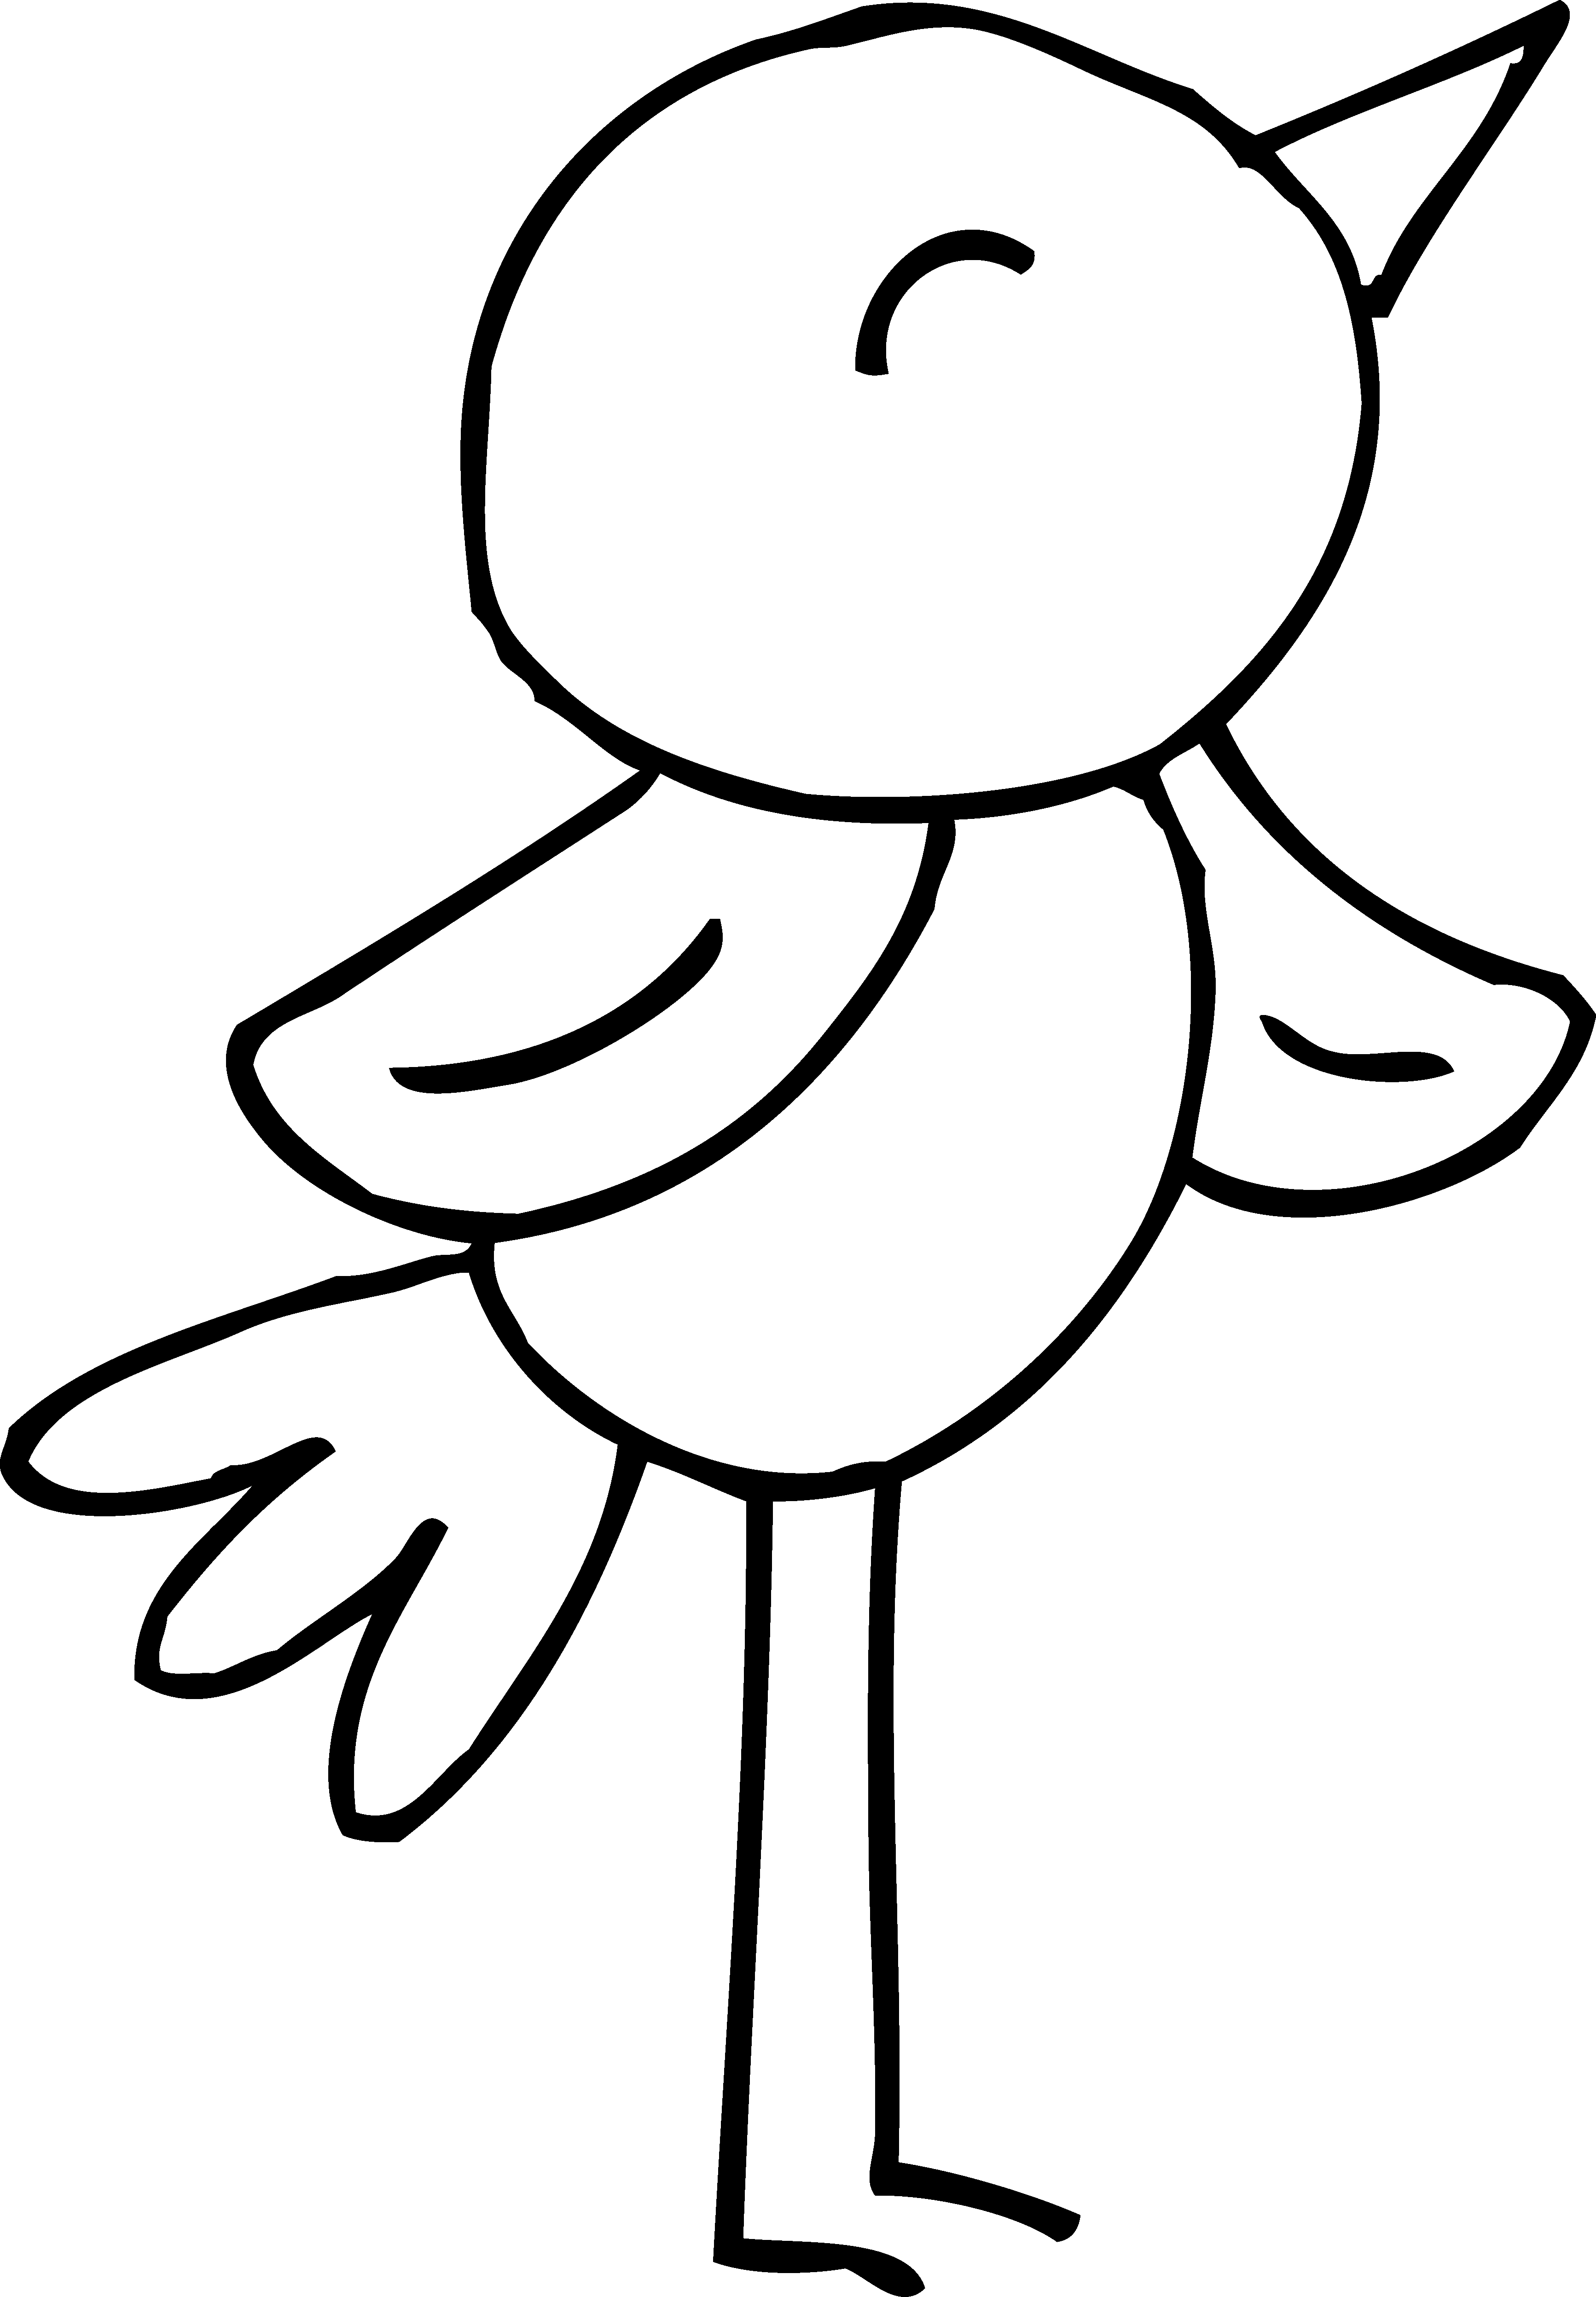 Png Spring Black And White - Png Spring Black And White Hdpng.com 3467, Transparent background PNG HD thumbnail